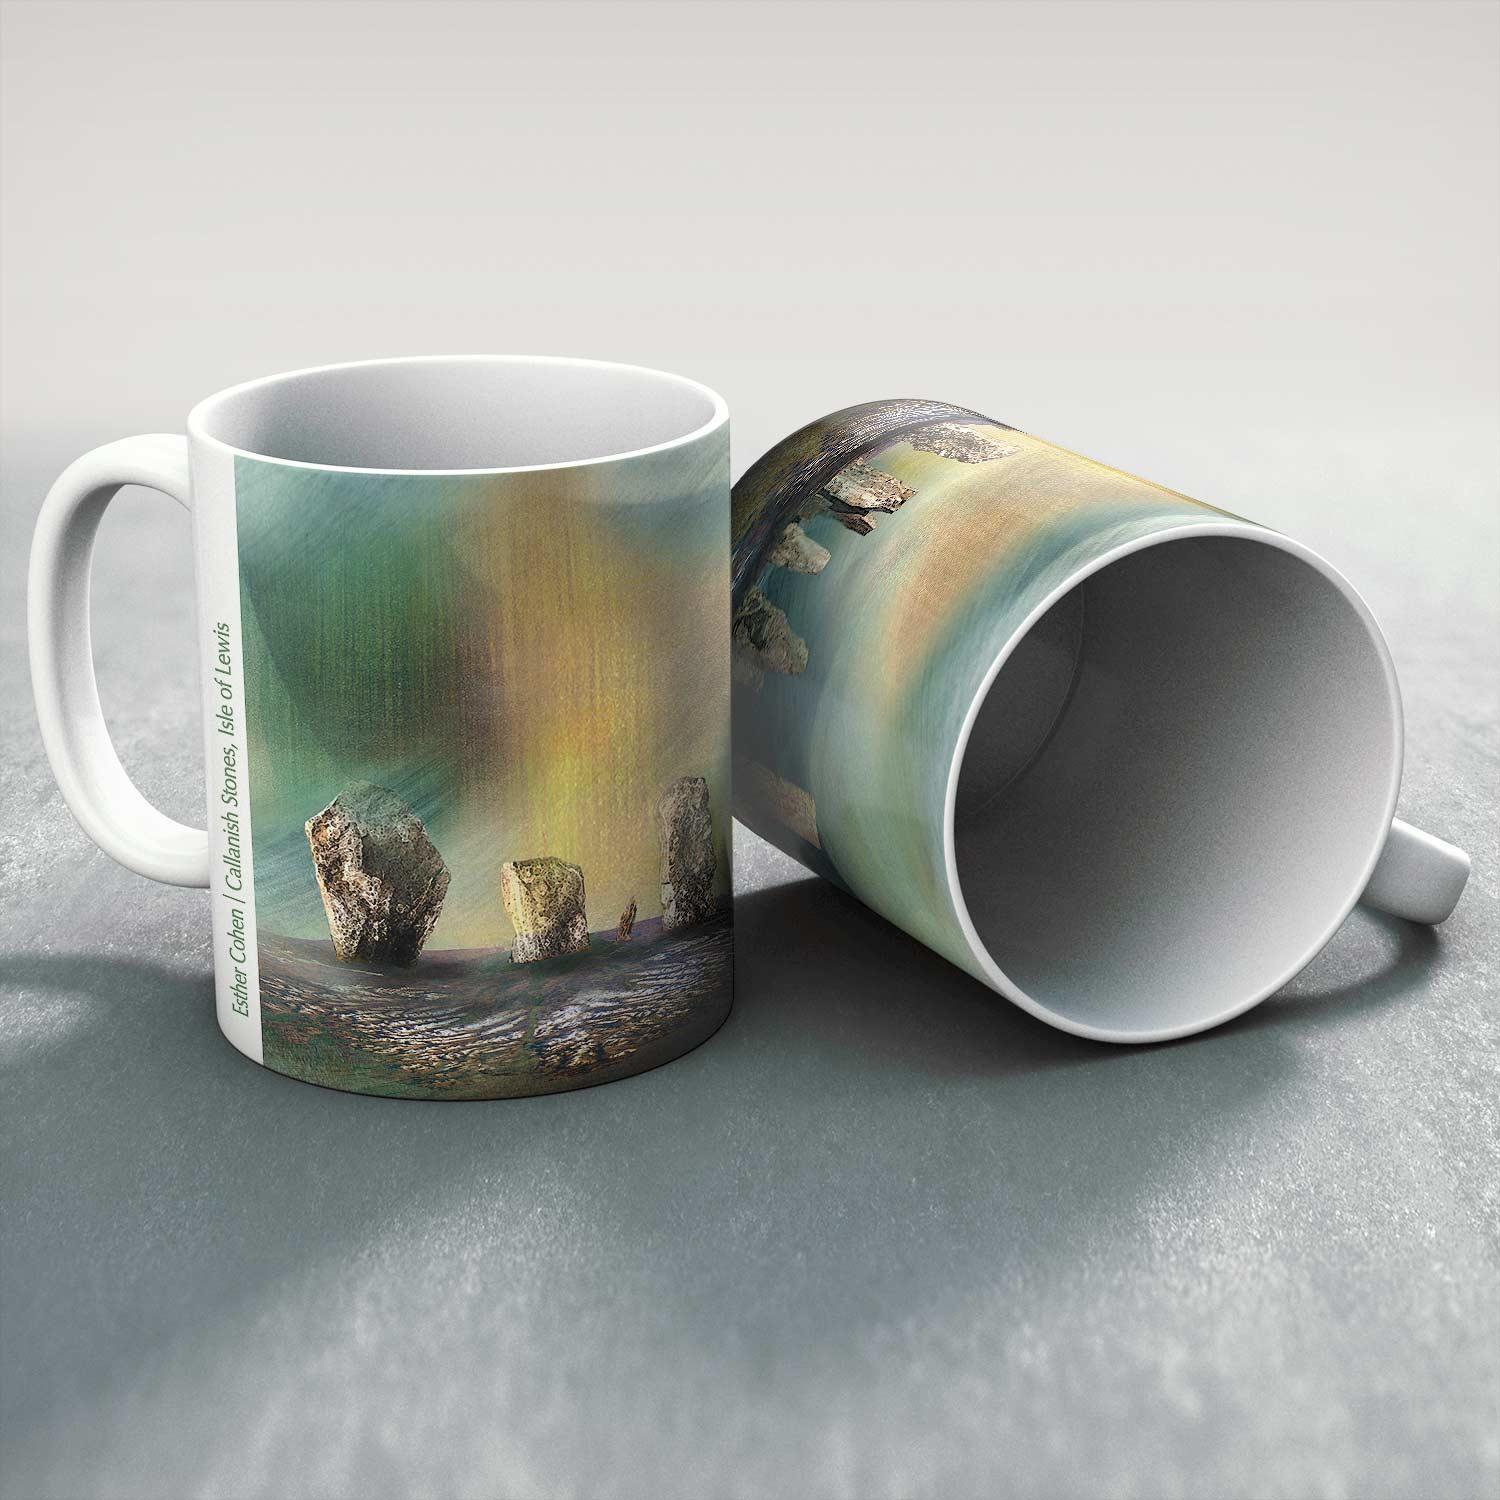 Callanish Stones, Isle of Lewis Mug from an original painting by artist Esther Cohen